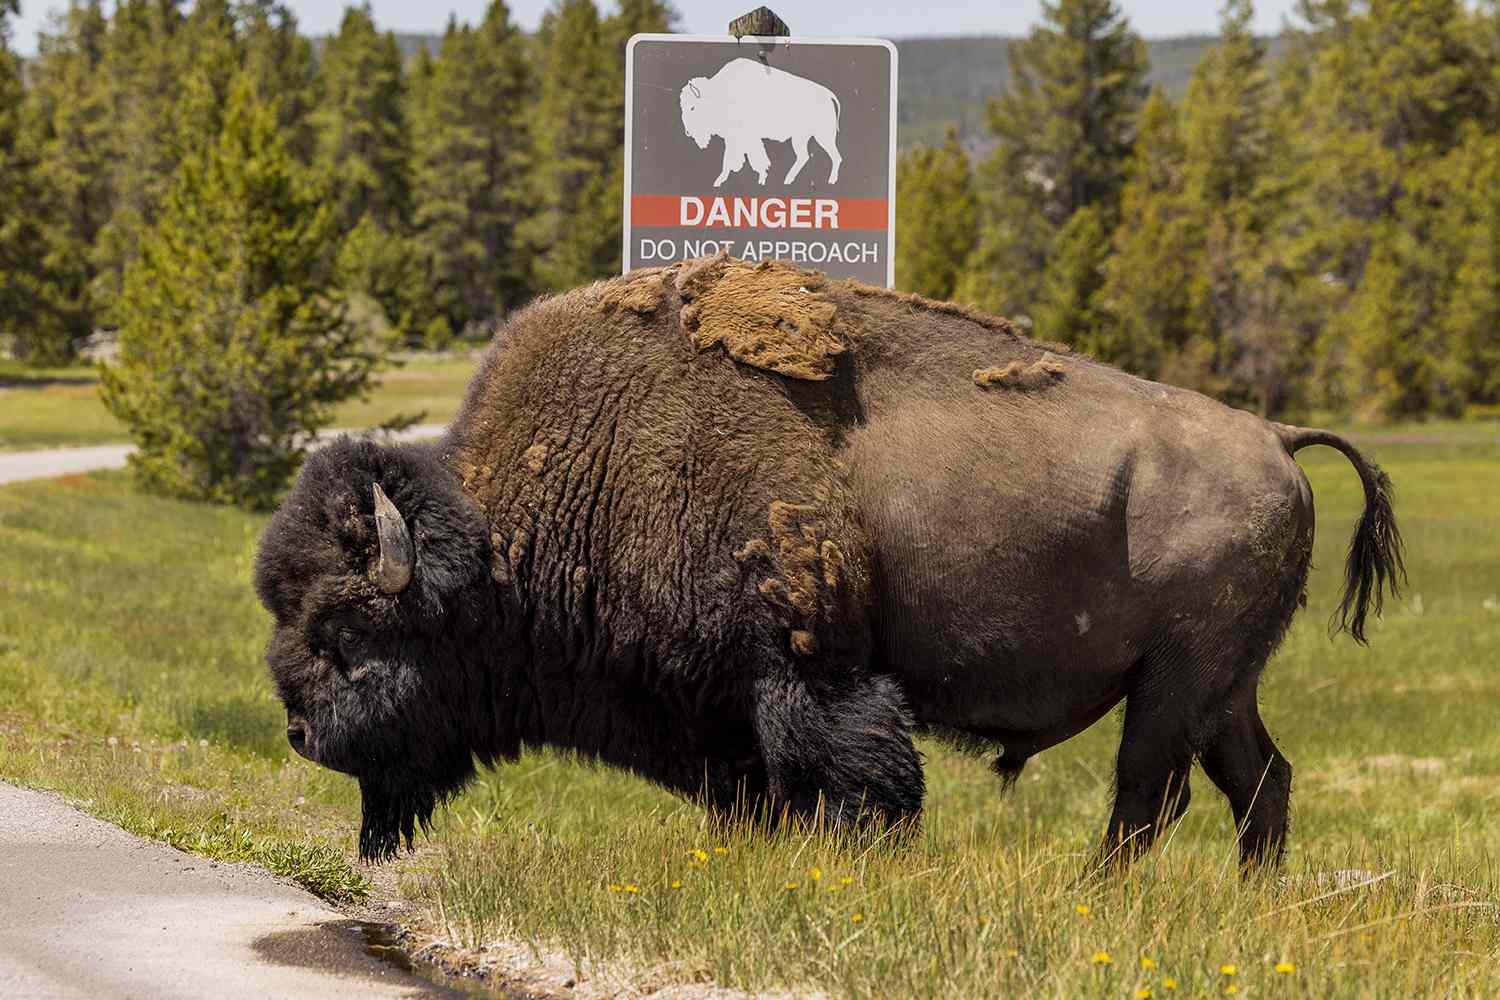 Woman, 83, Gored and Lifted 'About a Foot Off the Ground' by Bison at Yellowstone National Park